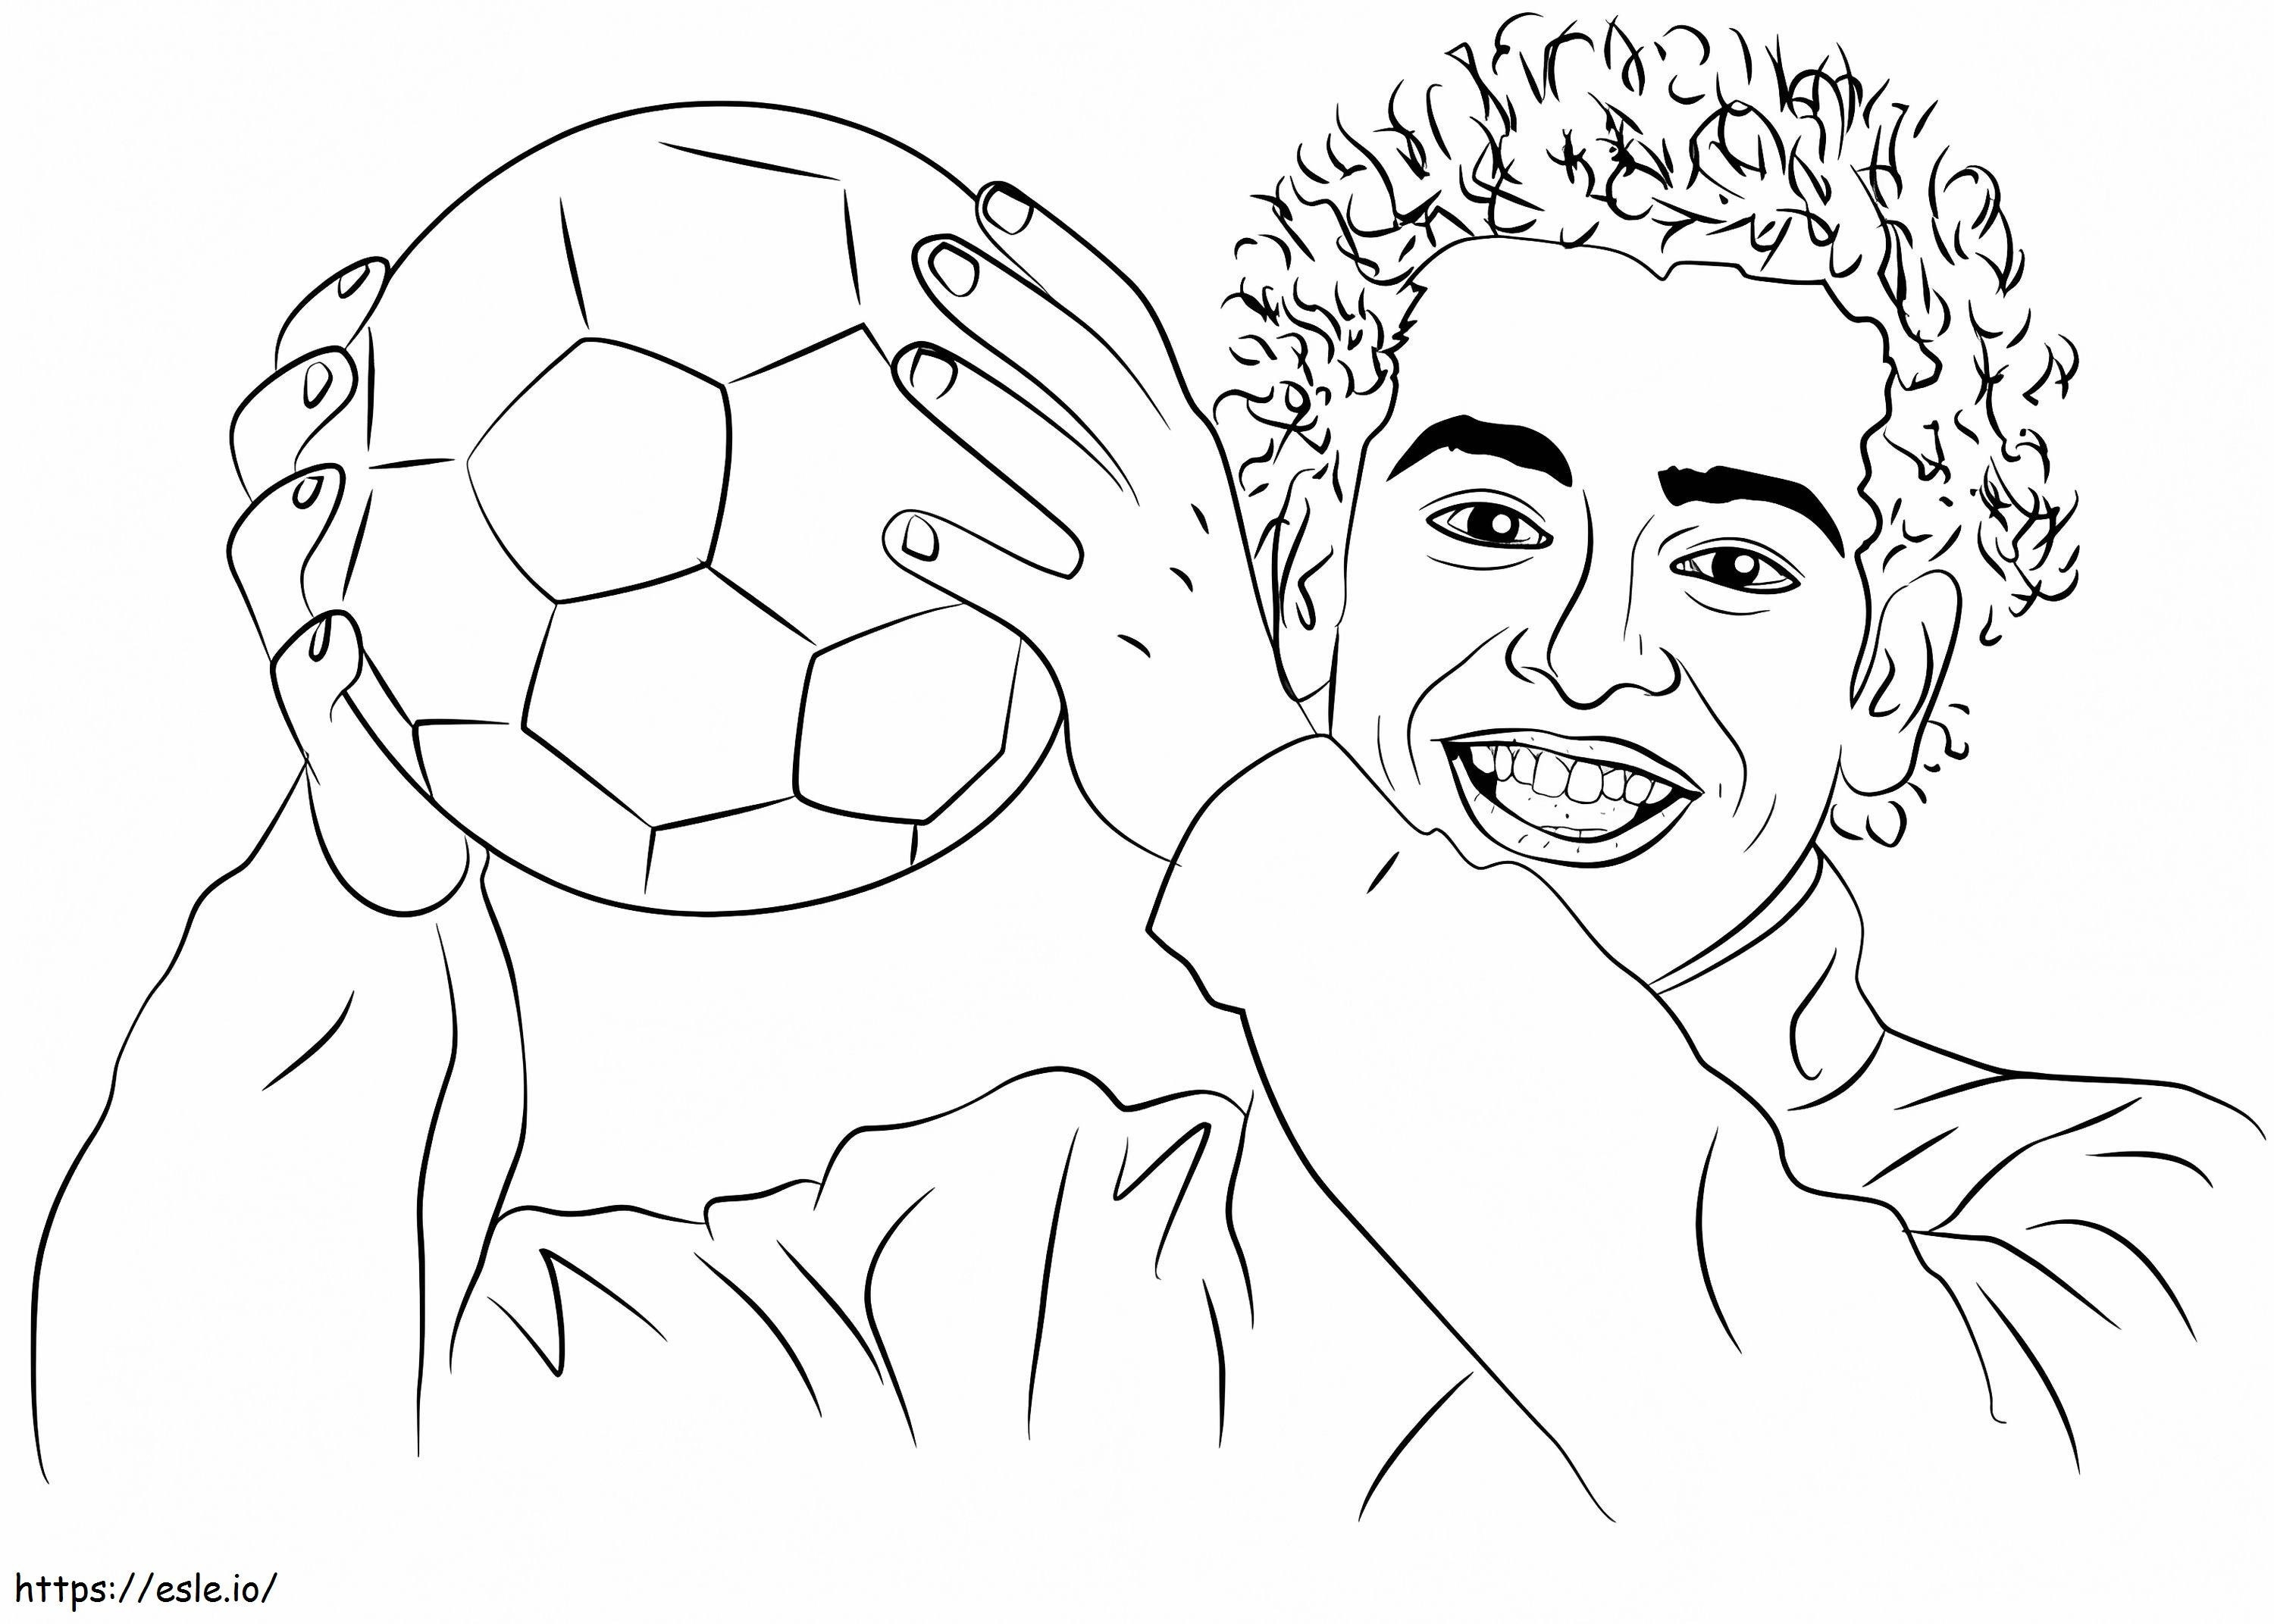 Mohamed Salah 4 coloring page